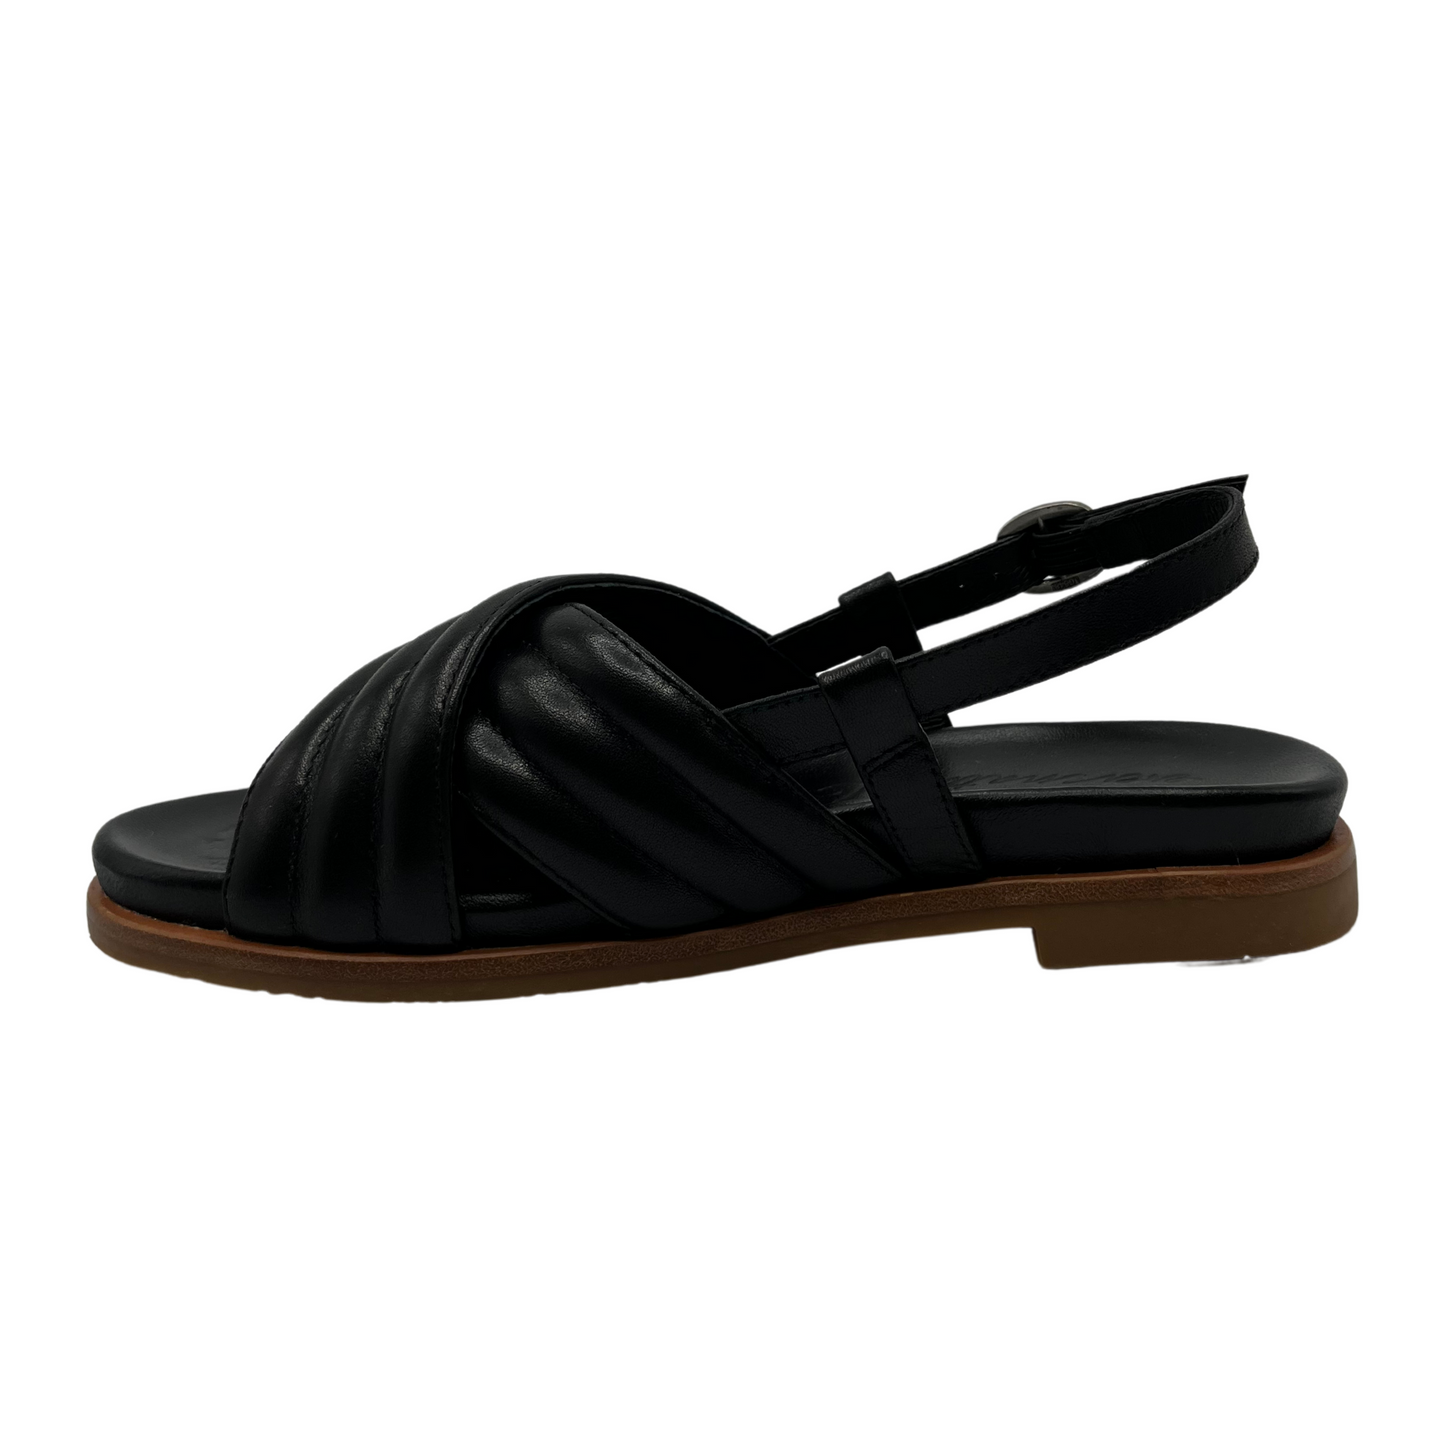 Left facing view of black leather sandal with padded cross over straps and sling back buckle strap